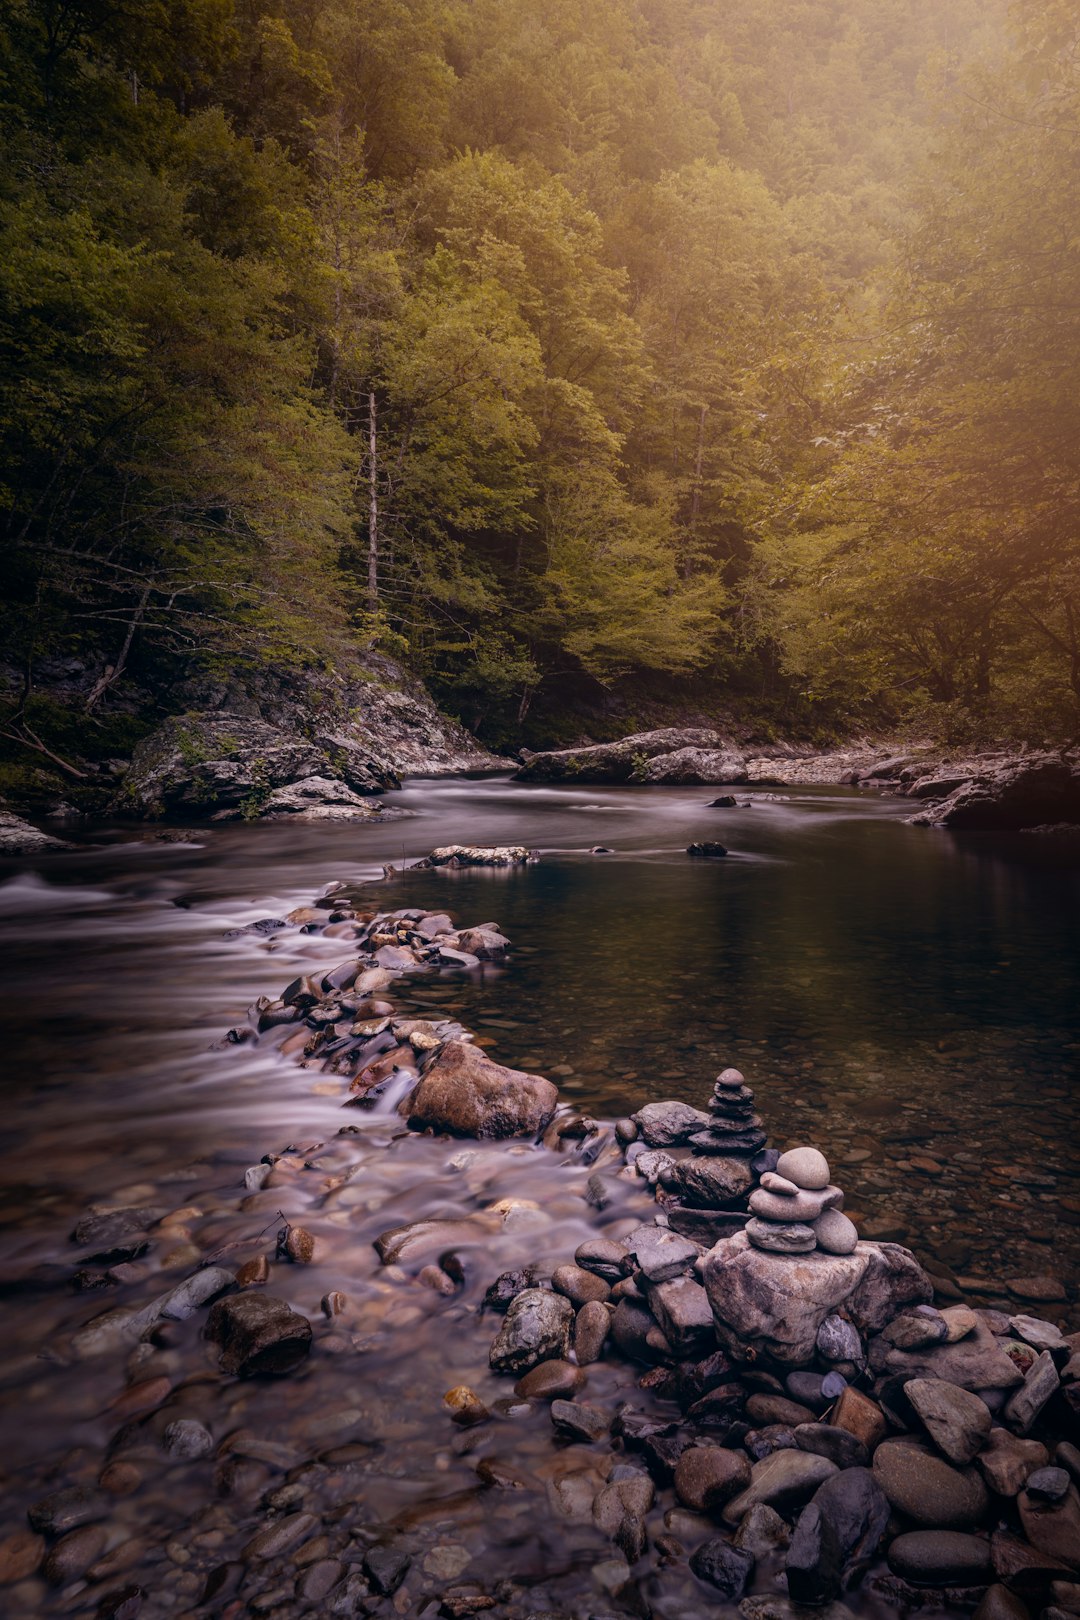 travelers stories about River in Great Smoky Mountains National Park, United States